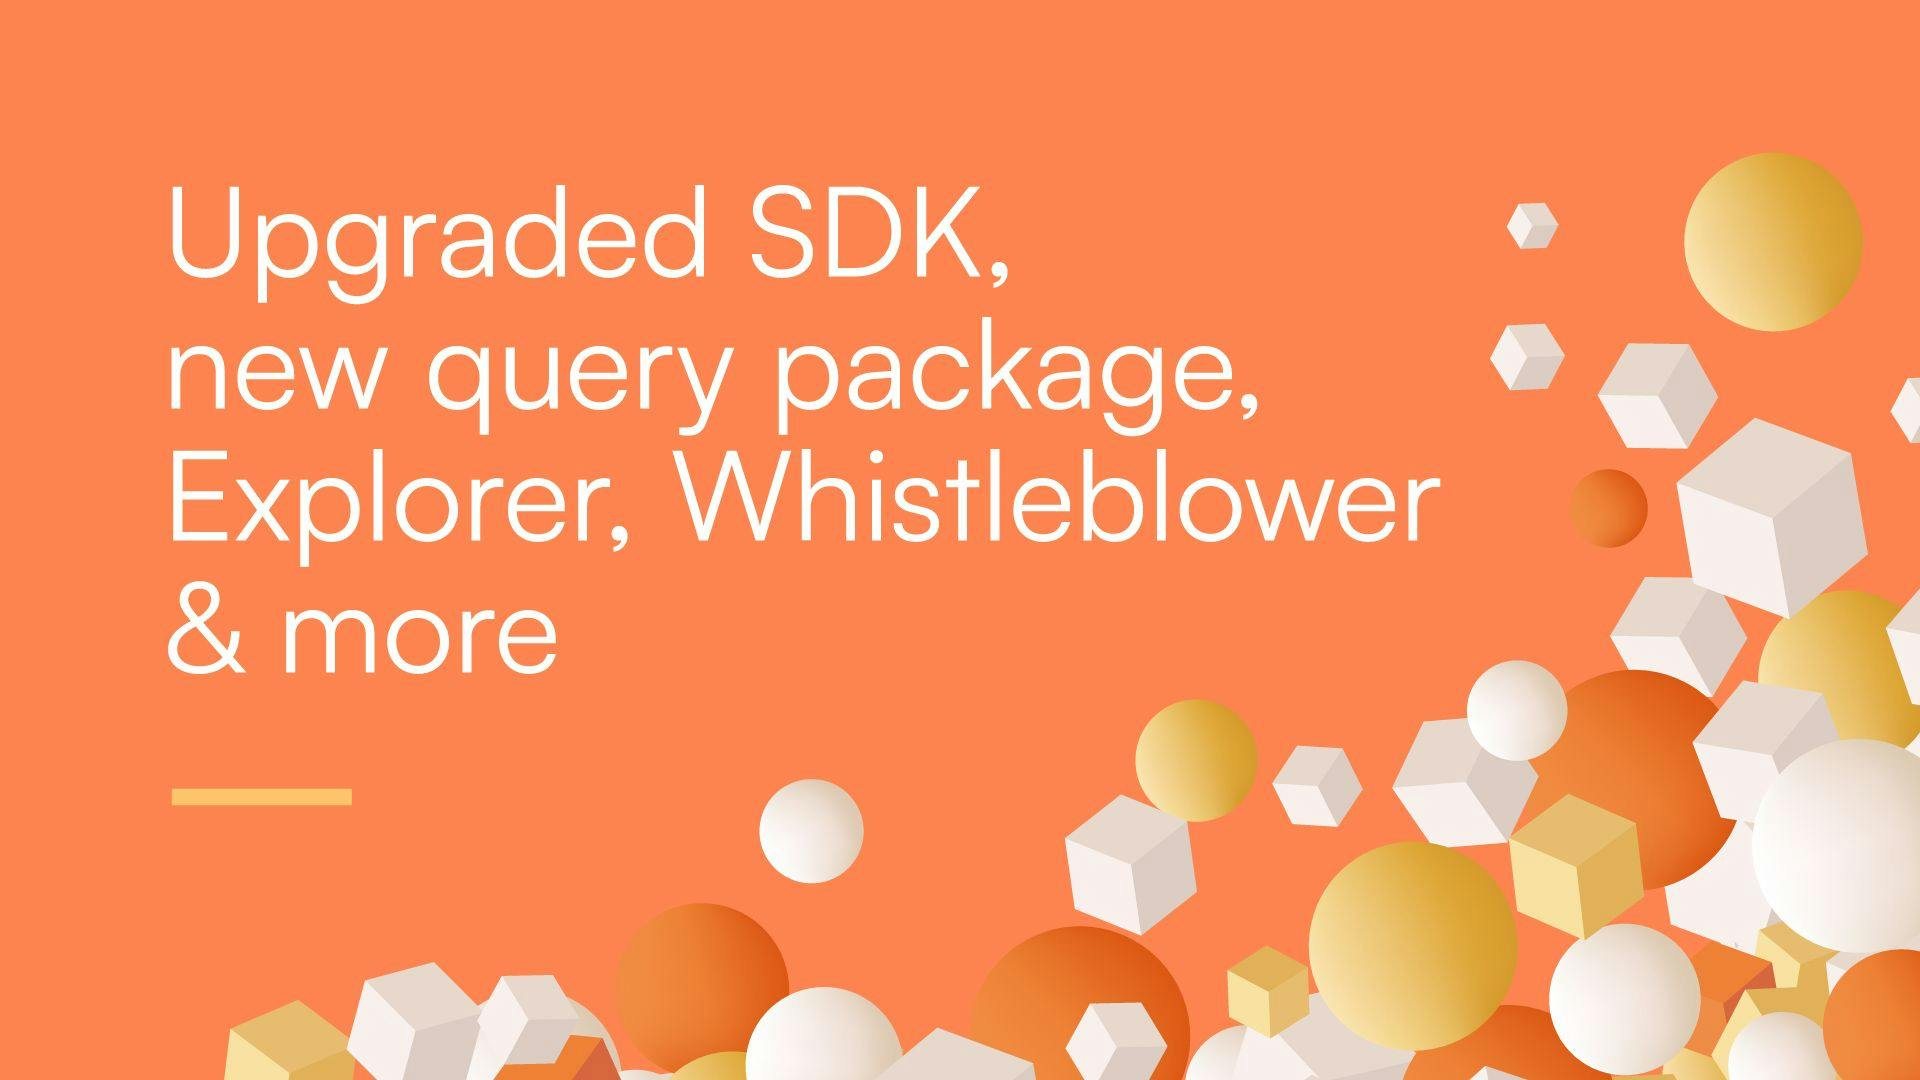 New from Irys: Upgraded SDK, query package, Explorer, Whistleblower, and more